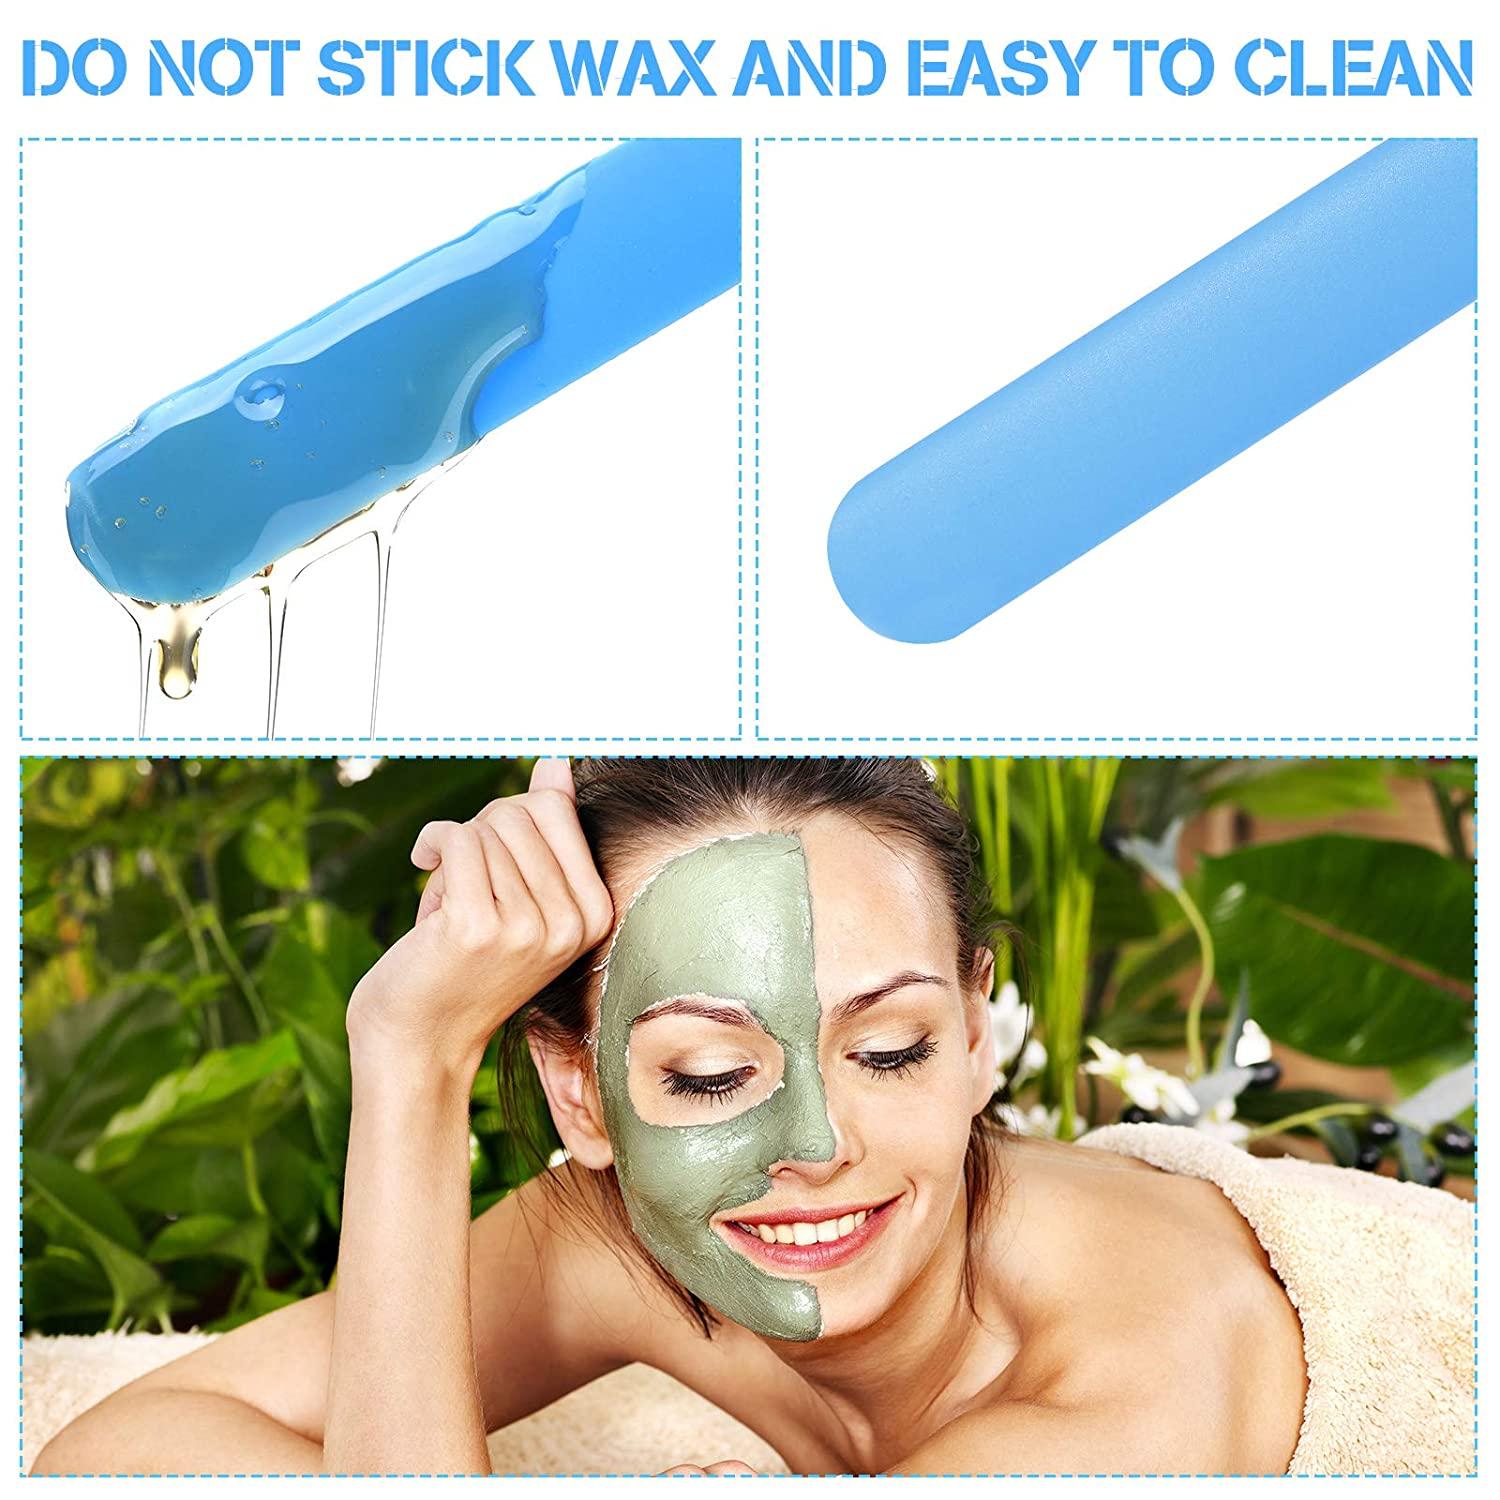 Reusable Hair Remover Silicone High Temperature Resistance Wax Applicator  Scraper Spatulas Sticks Removal Wax Hair Removal Tool - AliExpress